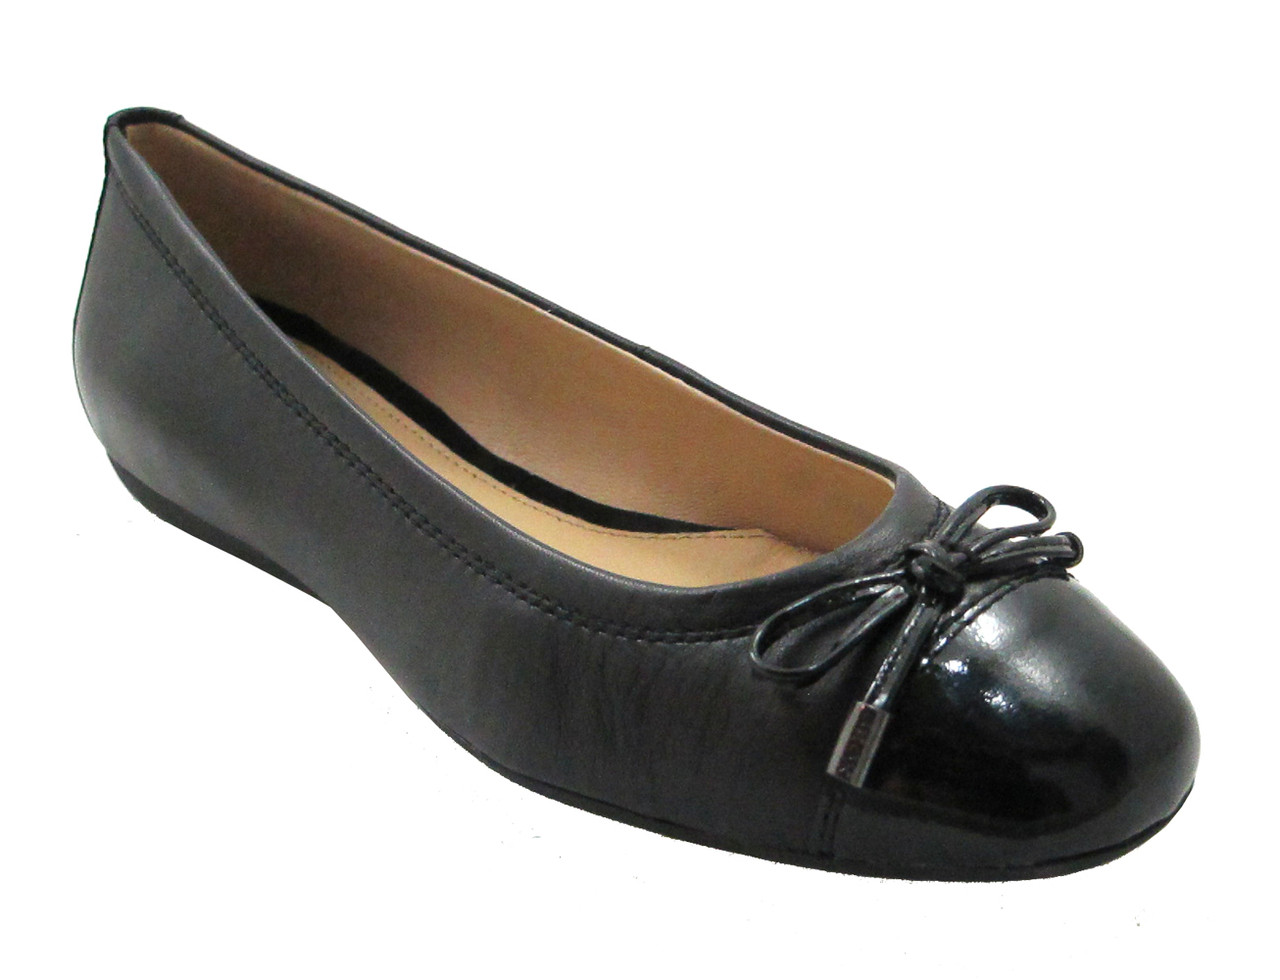 Geox Respira Dlola L - Nappa Patent Leather Flat Ballet shoes in Grey ...